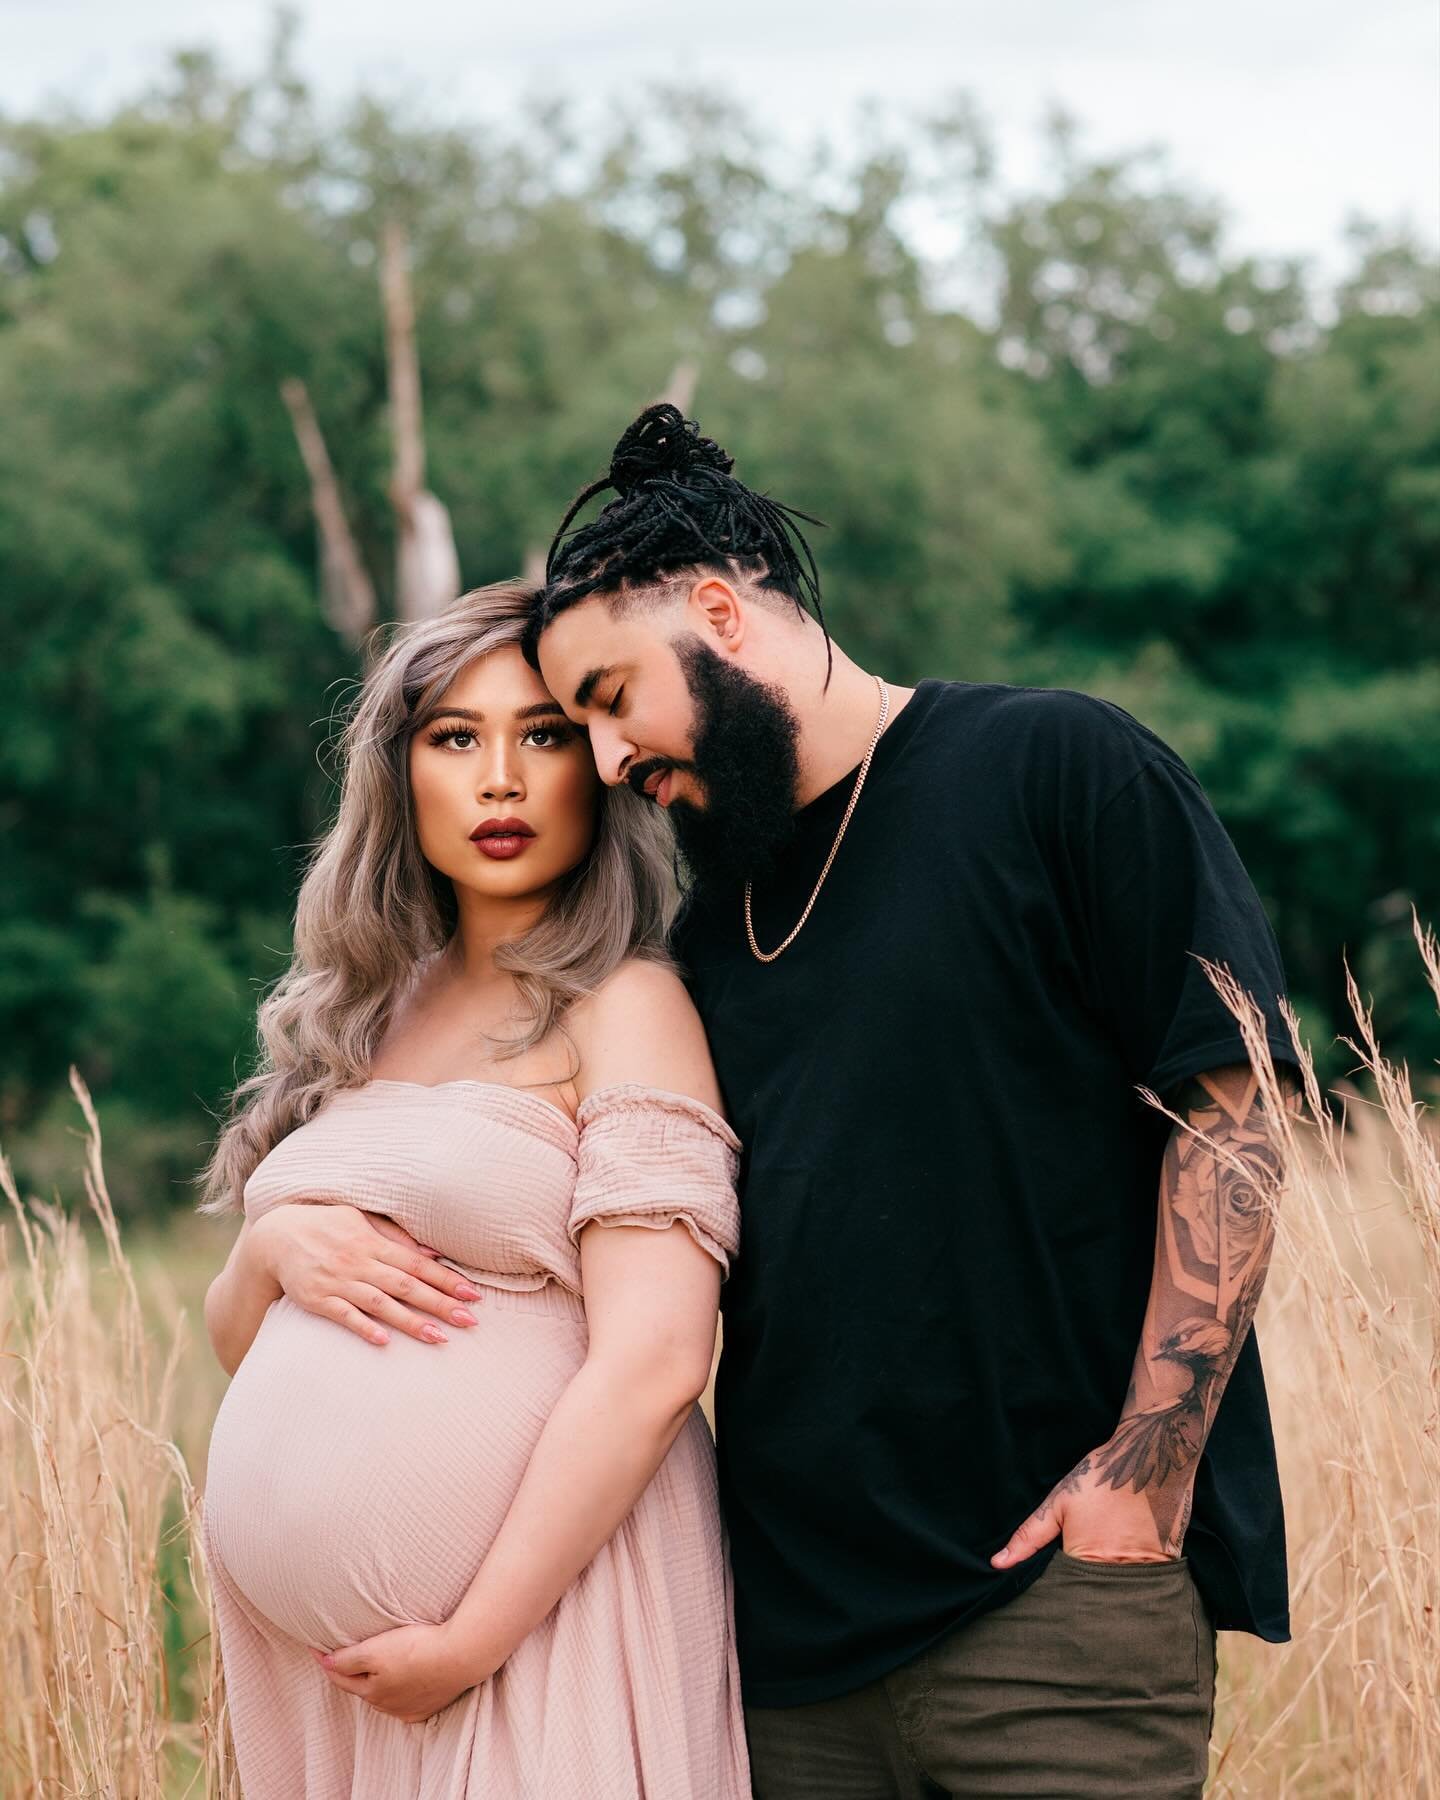 Summer baby coming soon! I had the pleasure of photographing the owner of @garden.of.ink.sanford and his wife&rsquo;s maternity session. I can&rsquo;t wait to share more from their session!

Hair by @glamourmishbeauty